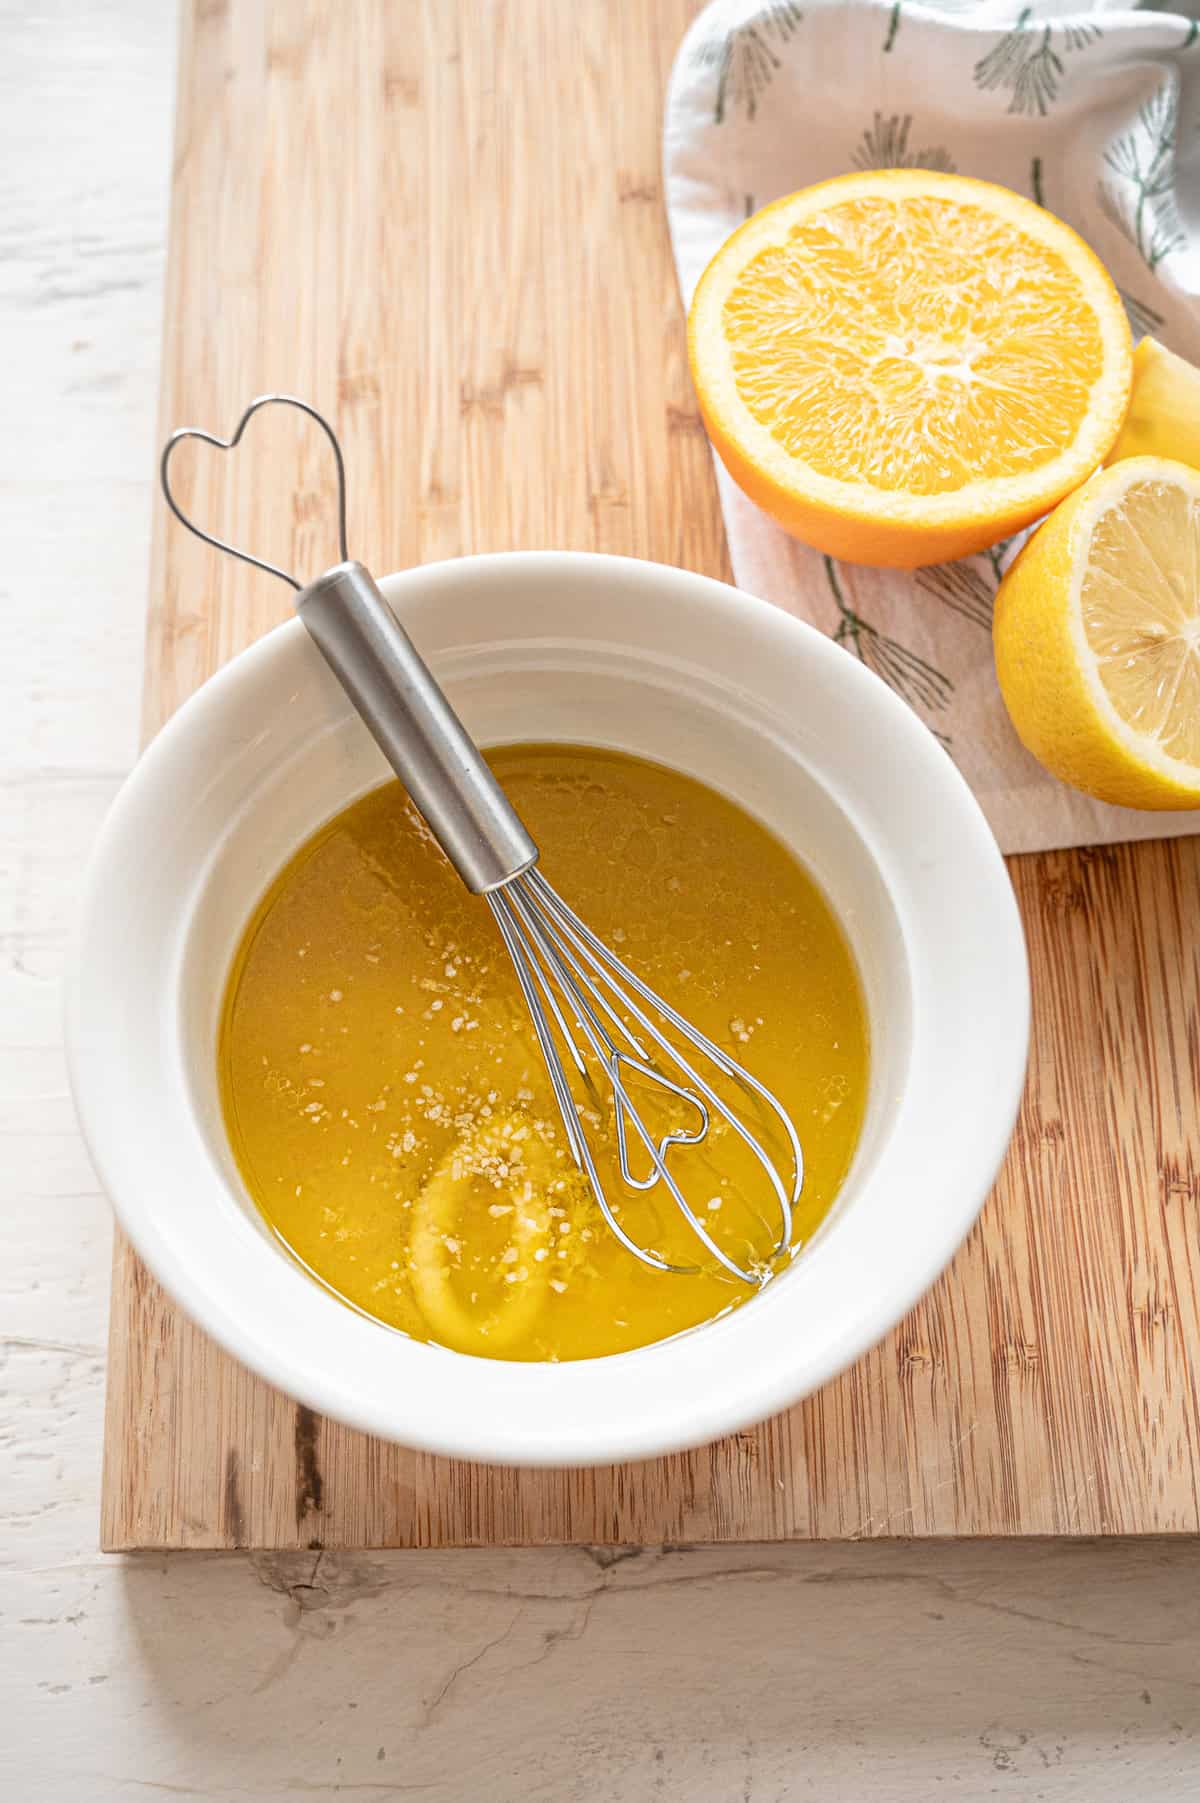 Creamy citrus salad dressing ingredients being whisked together with a small wire whisk in a white bowl.